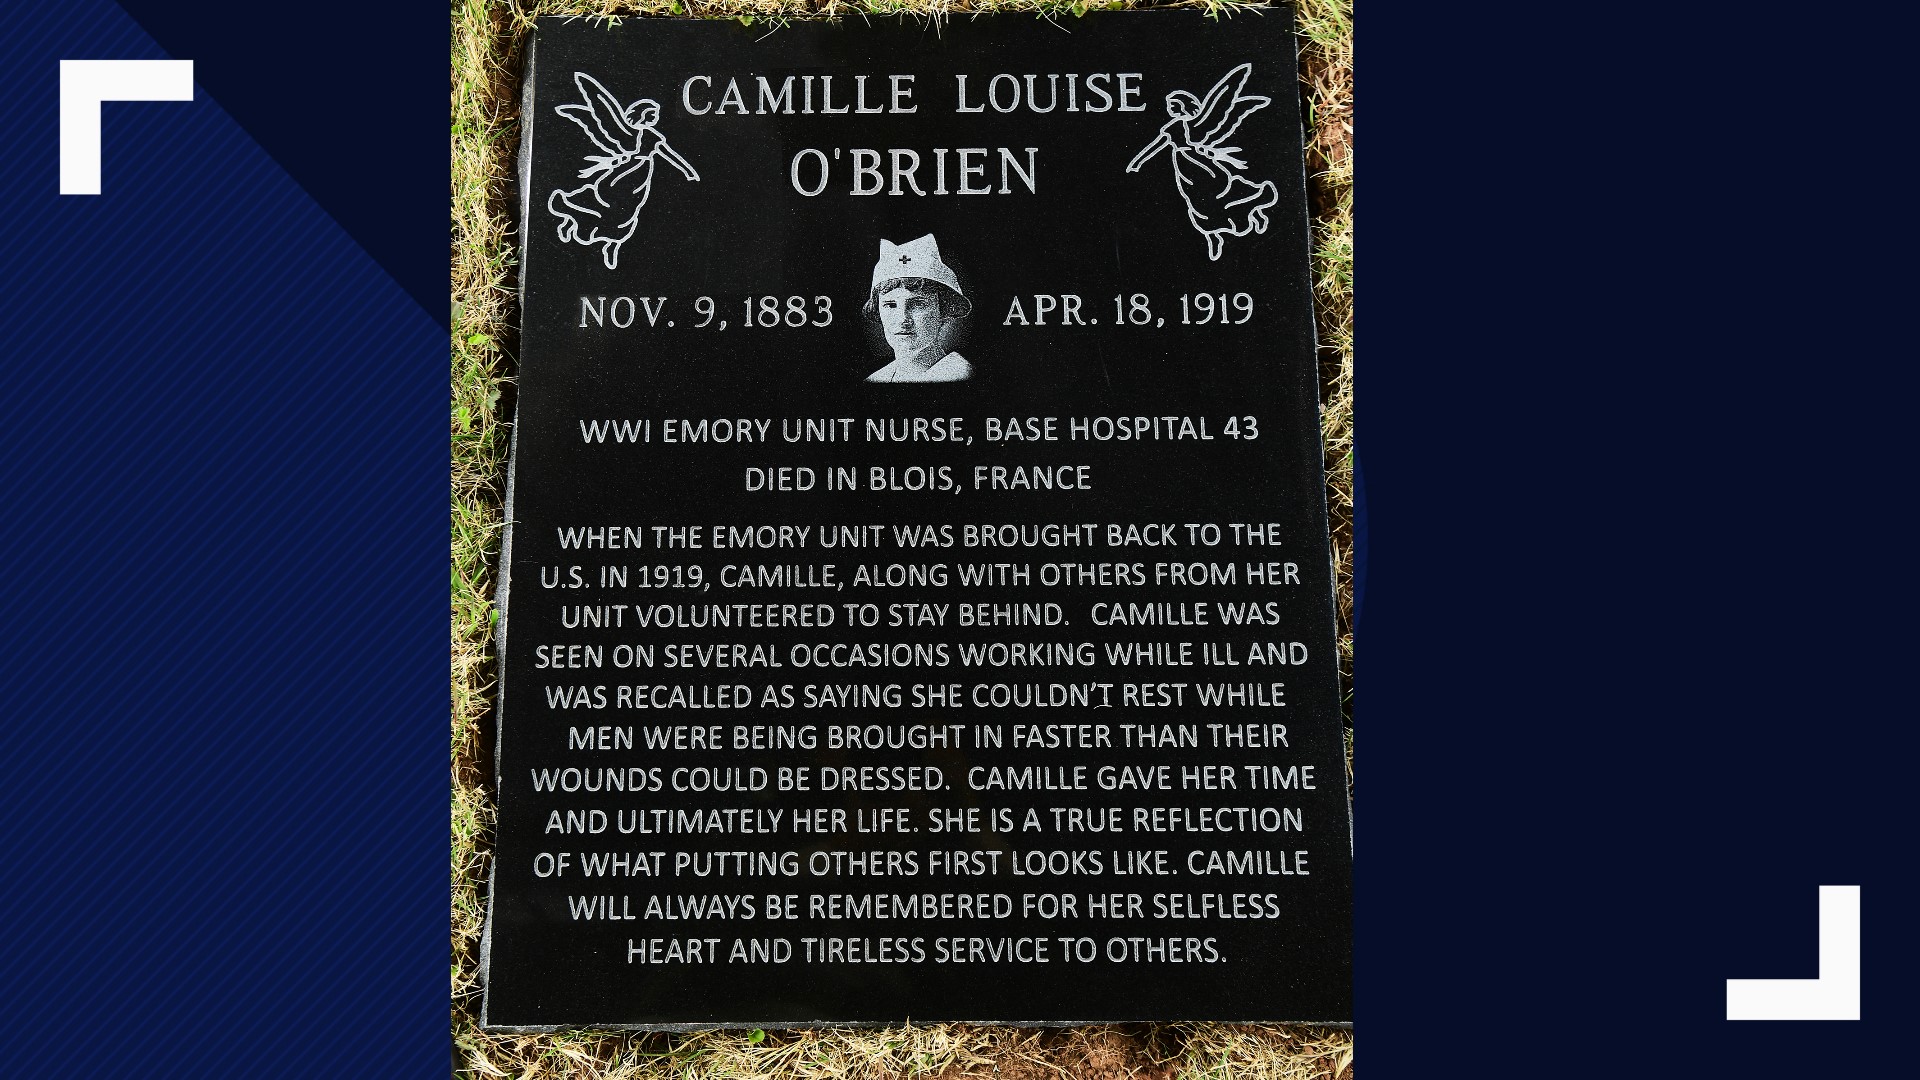 Camille O'Brien was honored Thursday, April 18, 2019 - 100 years after she died.